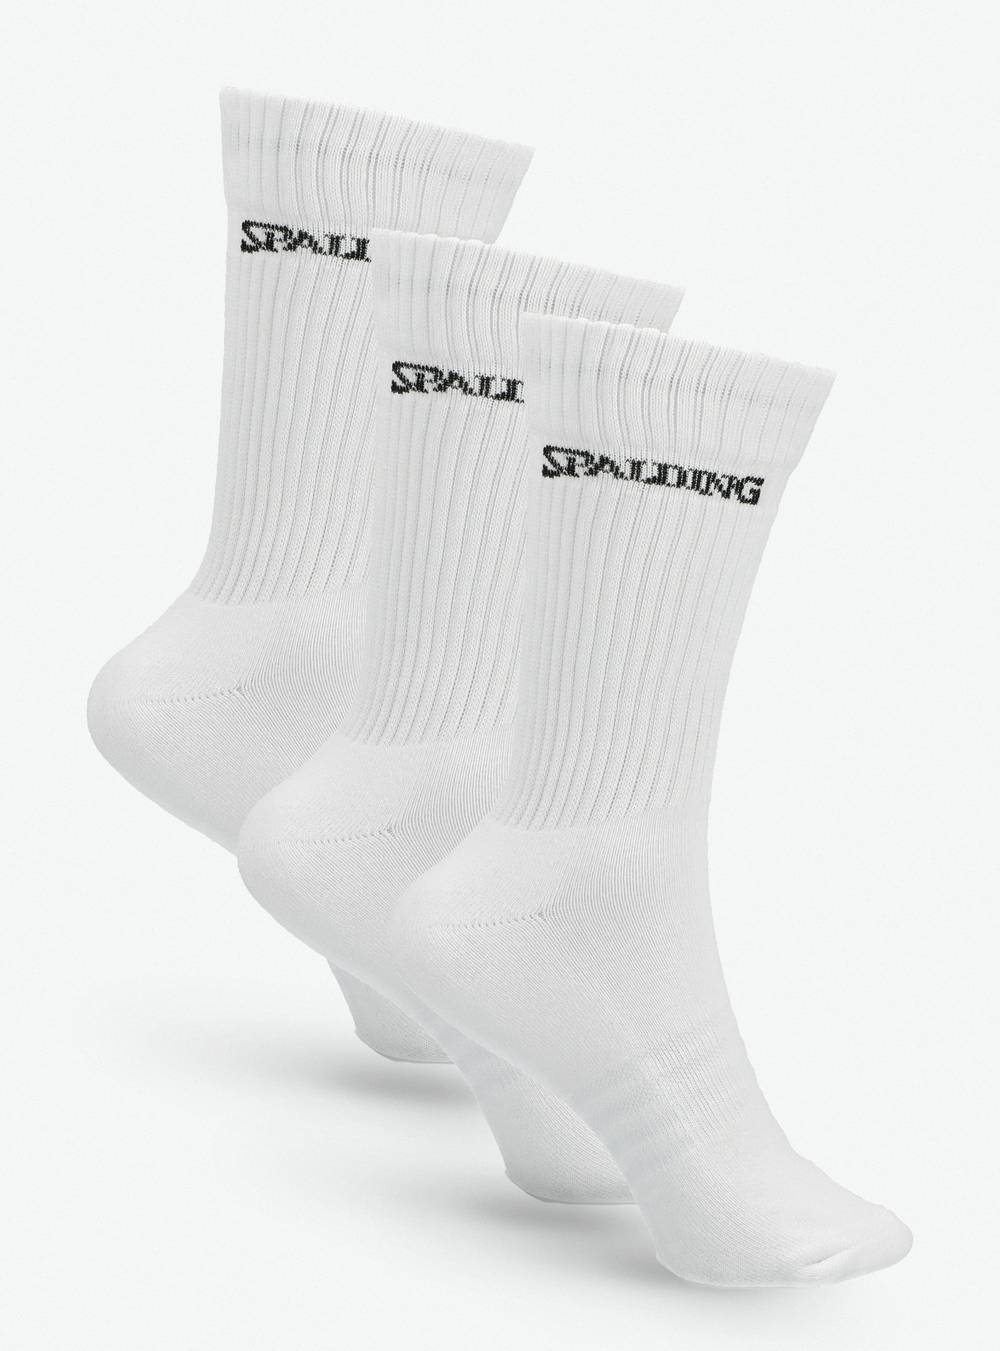 Spalding pack 3 calcetines yucr 2002 hombre (3 u)